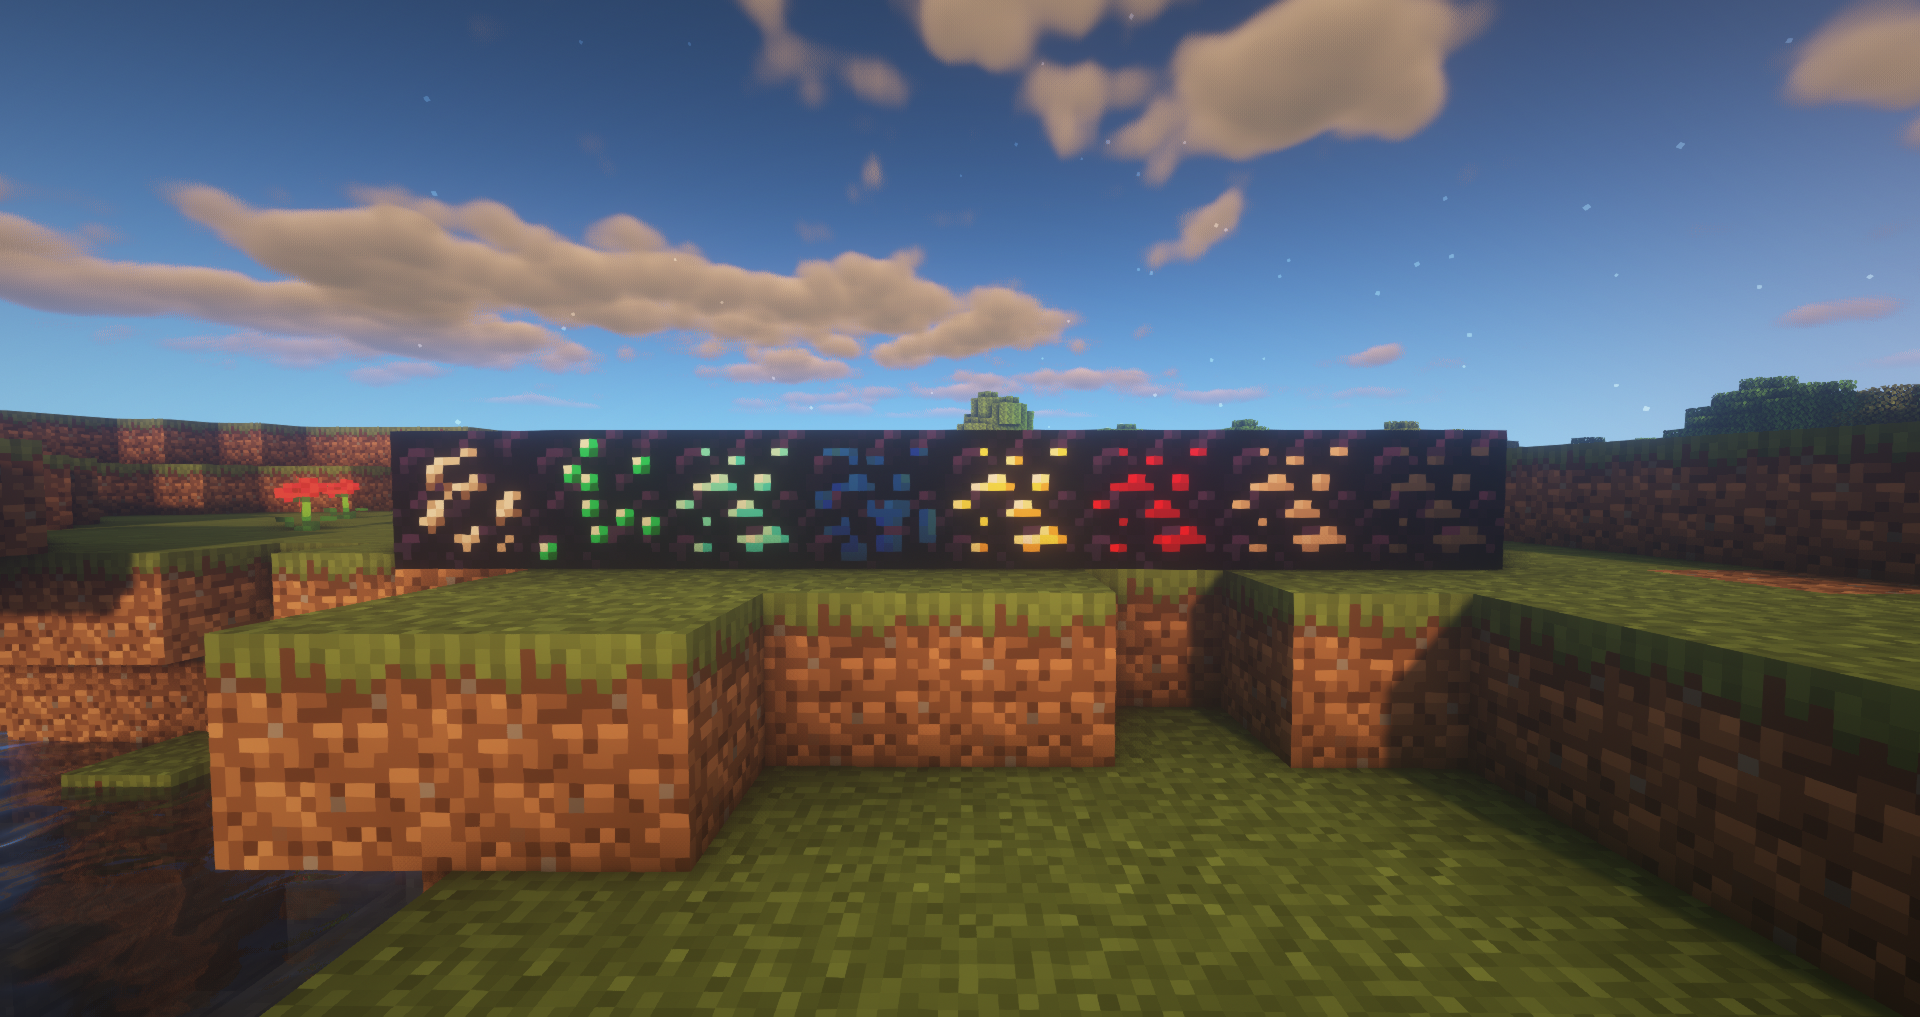 All the ores